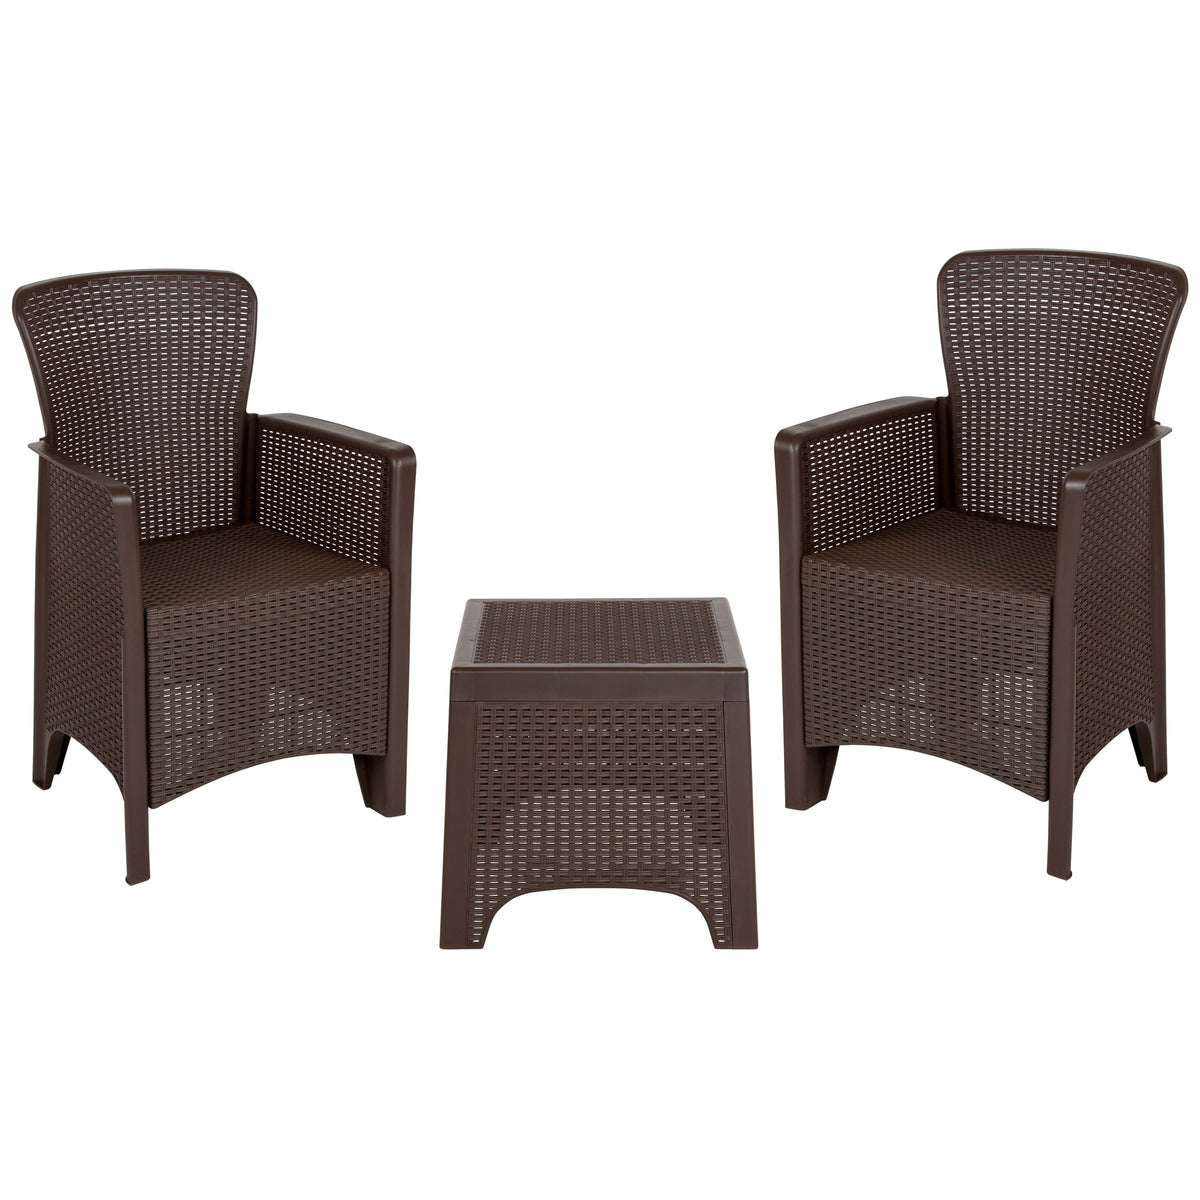 Chocolate |#| Chocolate Faux Rattan Plastic Chair Set with Matching Side Table - Patio Set